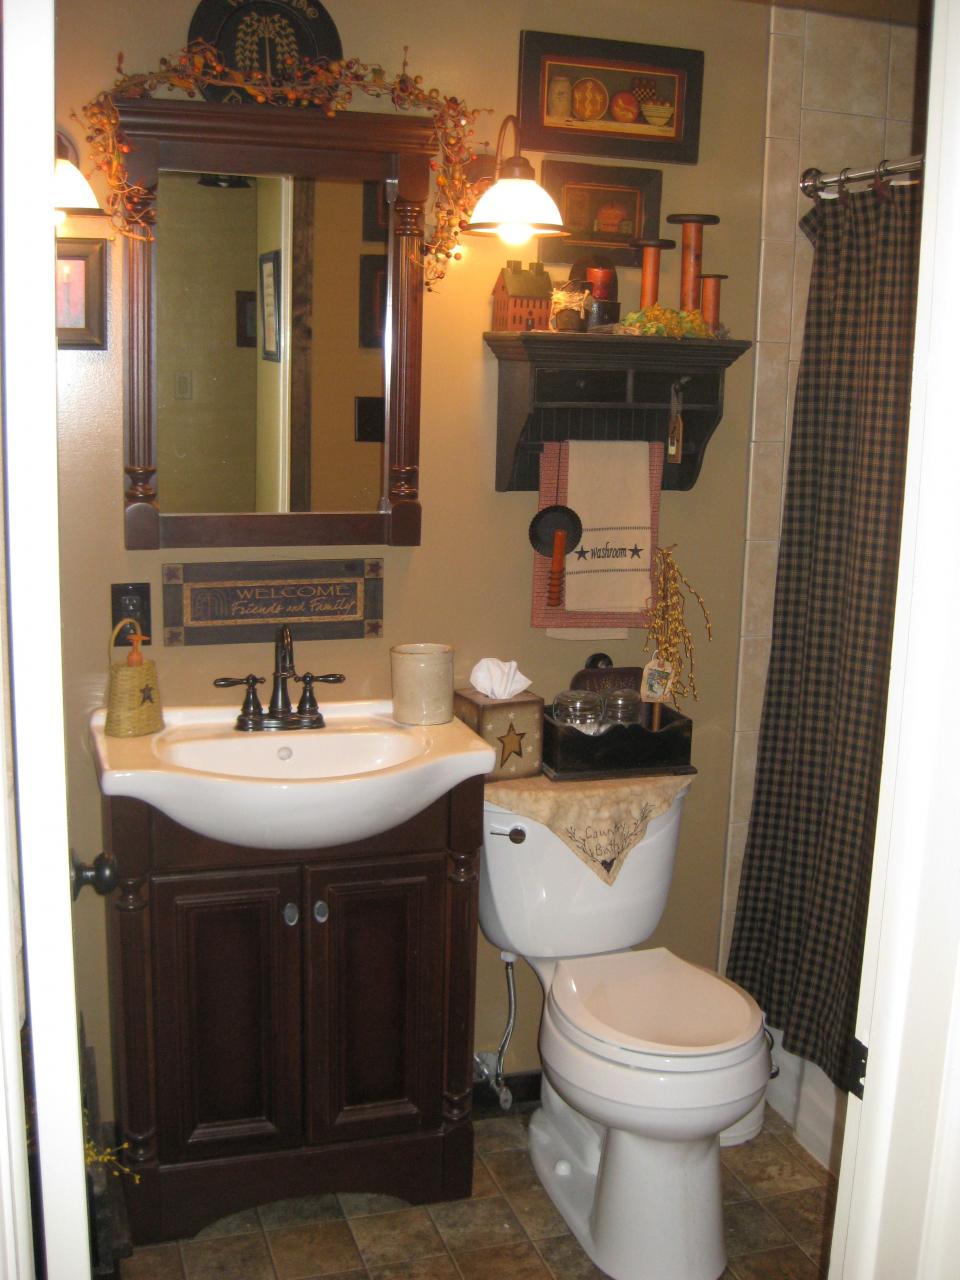 this is a little busy but I love some of the ideas...country bathroom